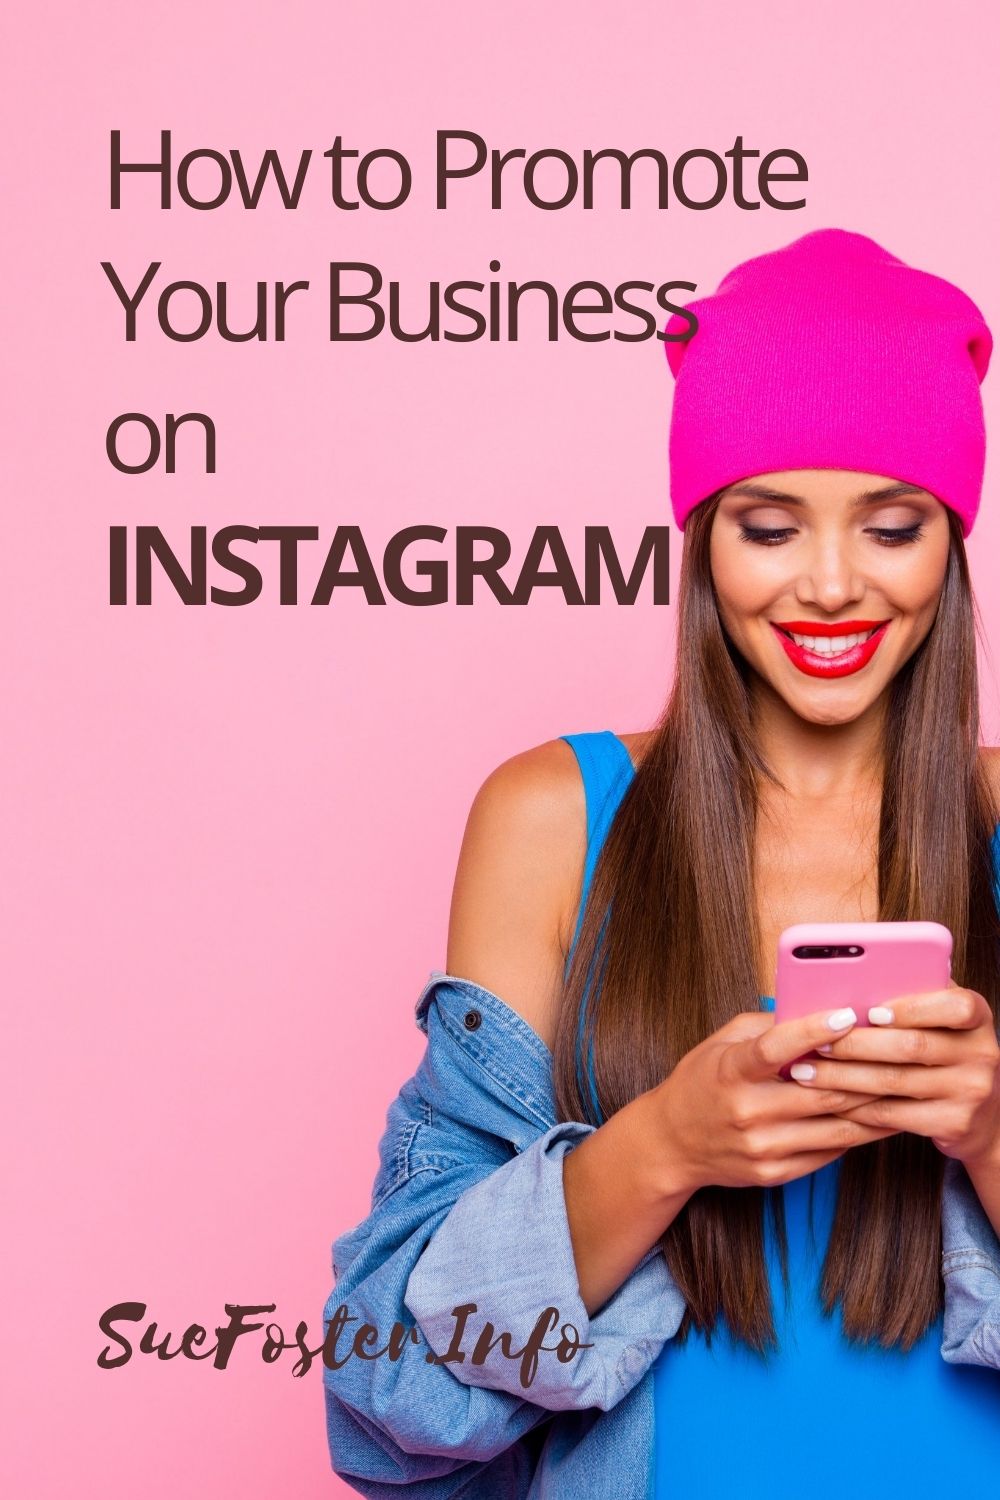 There are plenty of ways to grow your reach and market on Instagram. It’s a dynamic platform that gives you many ways to connect with viewers and humanize your brand!